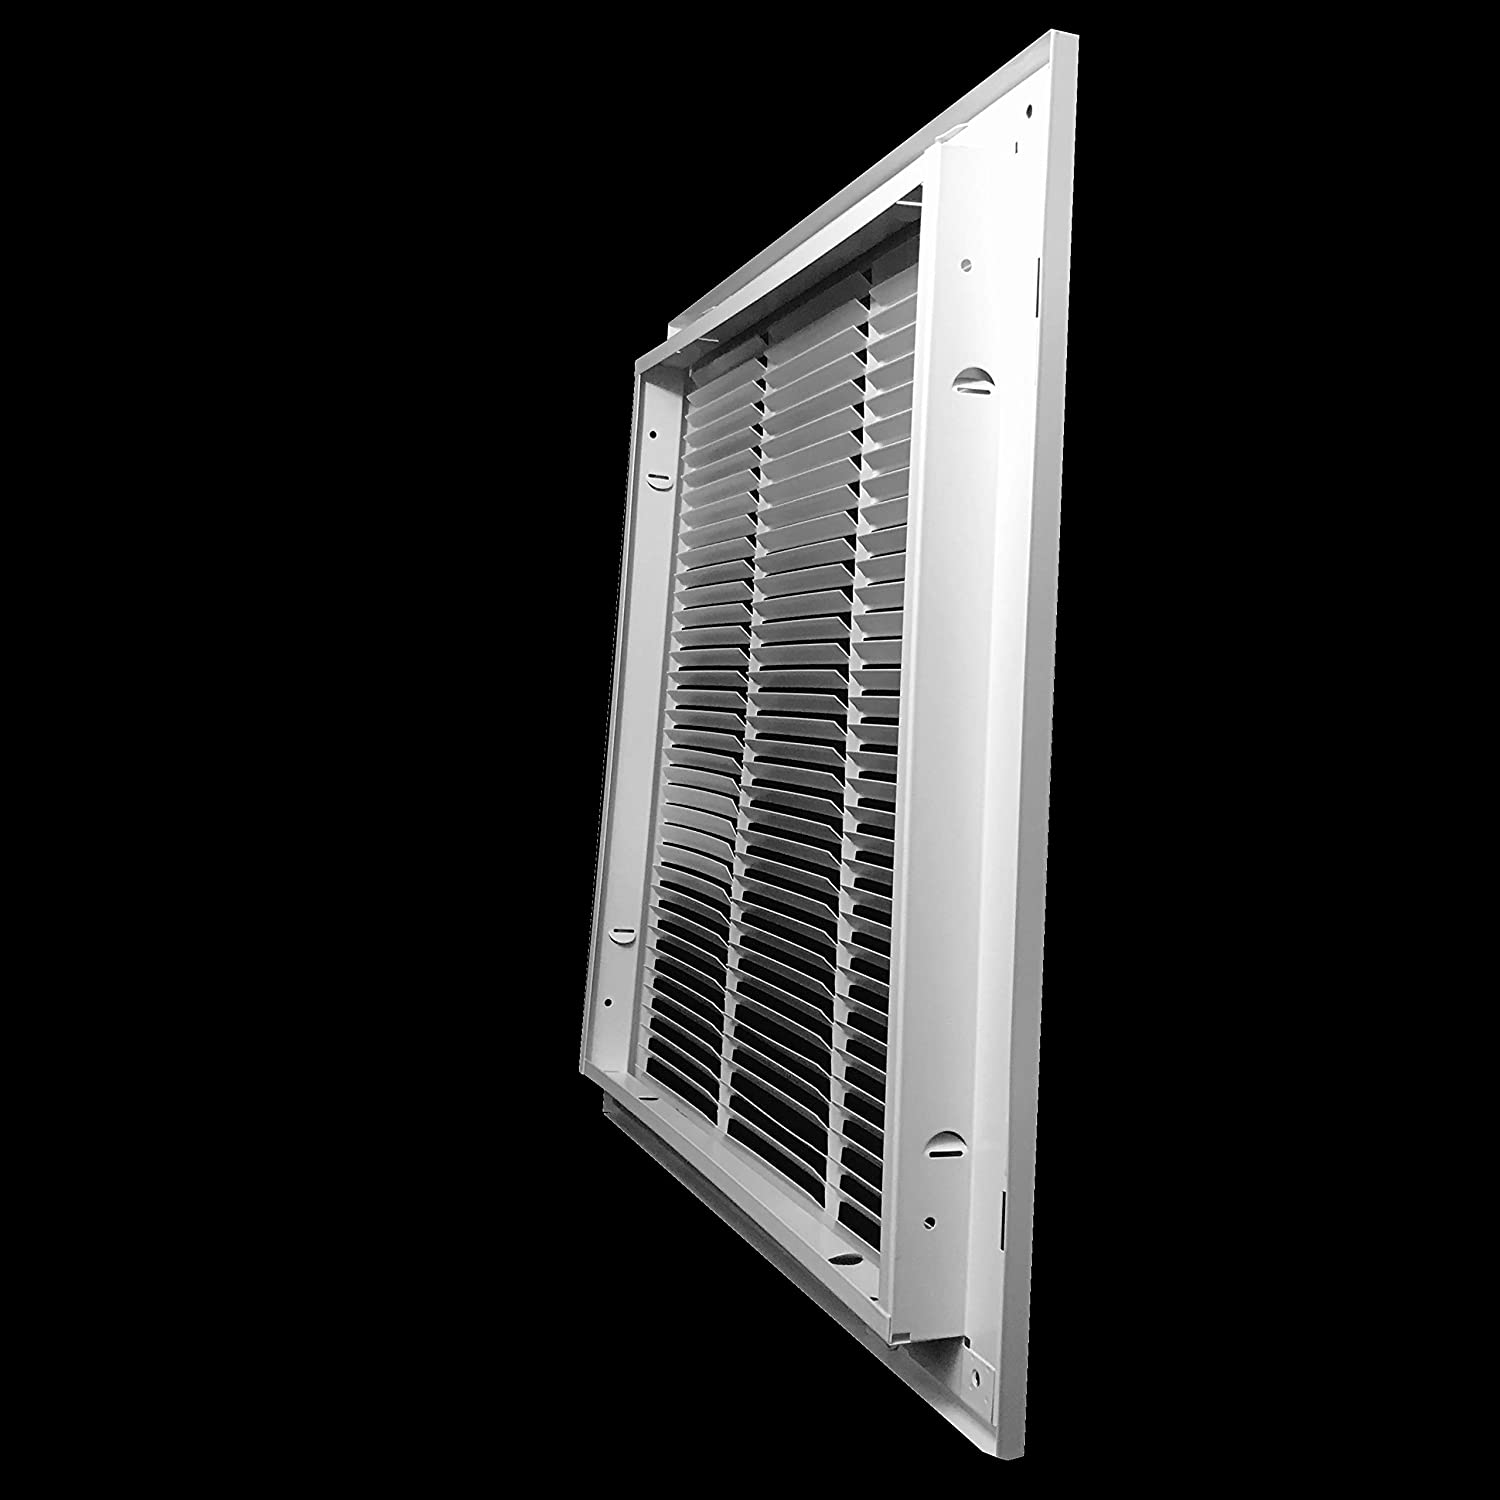 30" X 20" Duct Opening | Steel Return Air Filter Grille for Sidewall and Ceiling